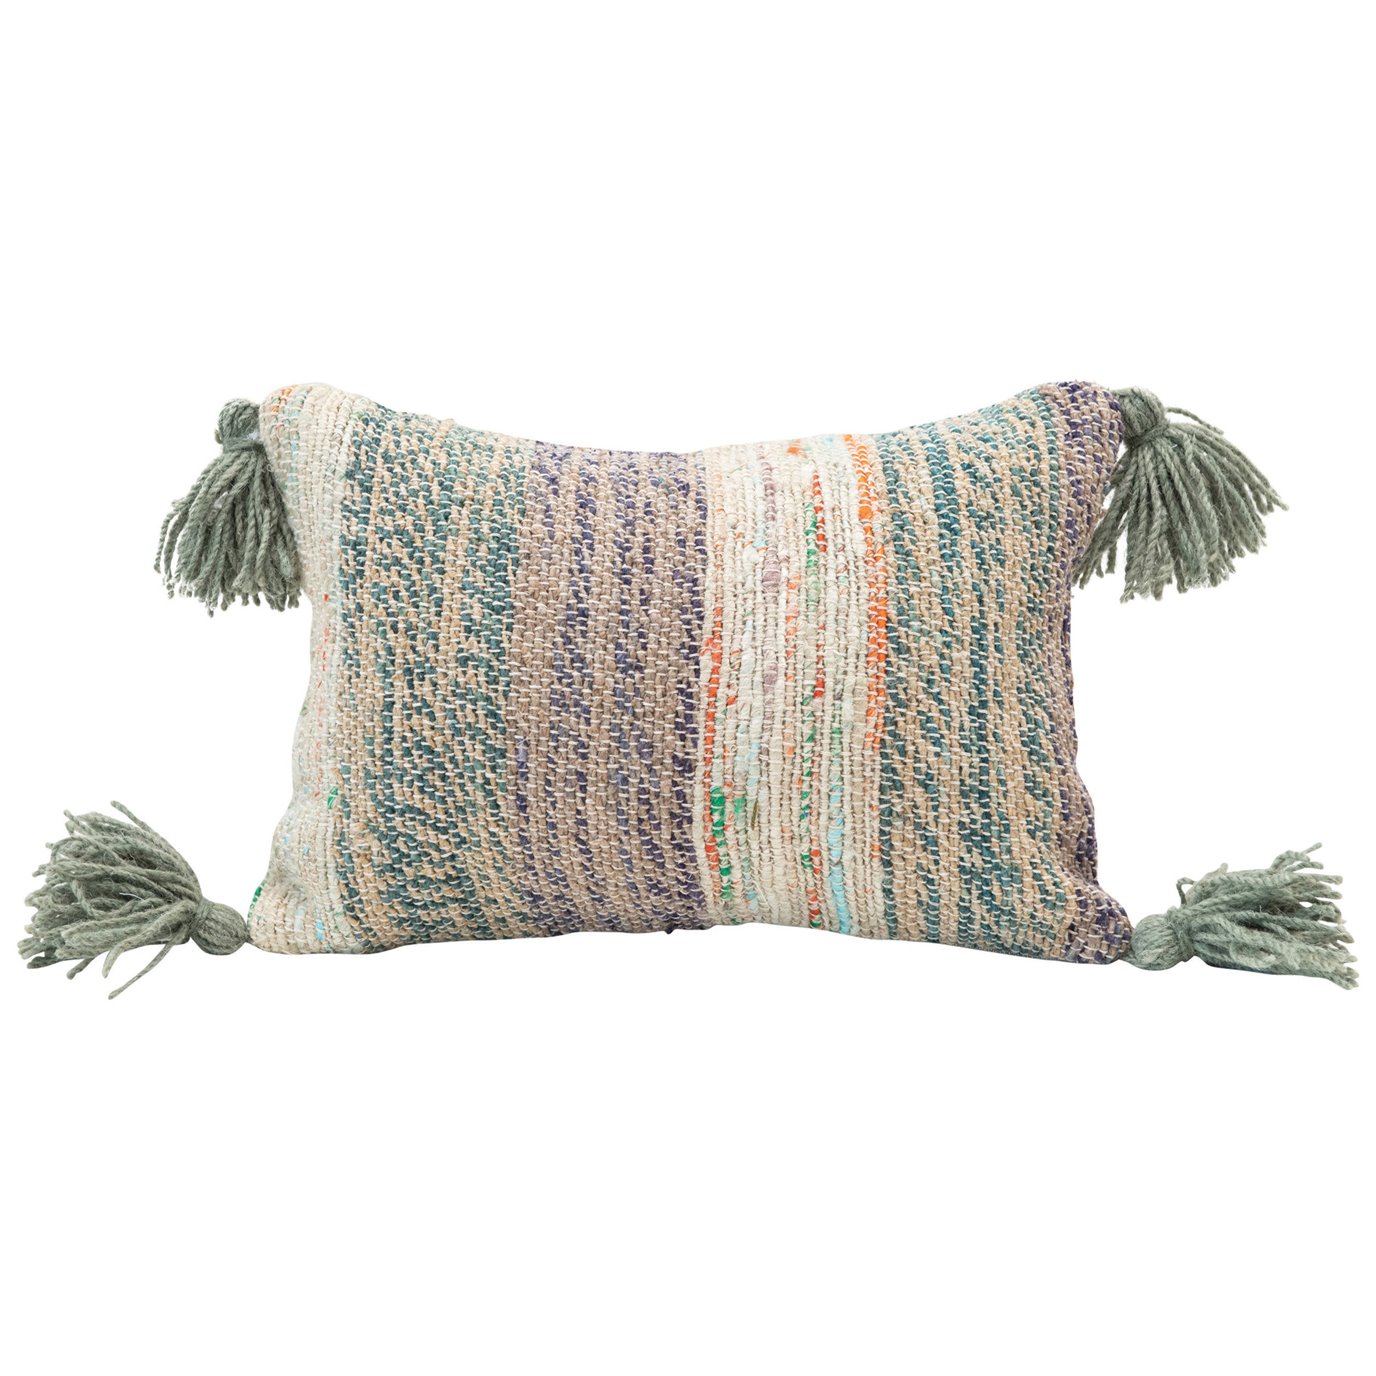 Cotton Woven Lumbar Pillow with Tassels, Multi Color